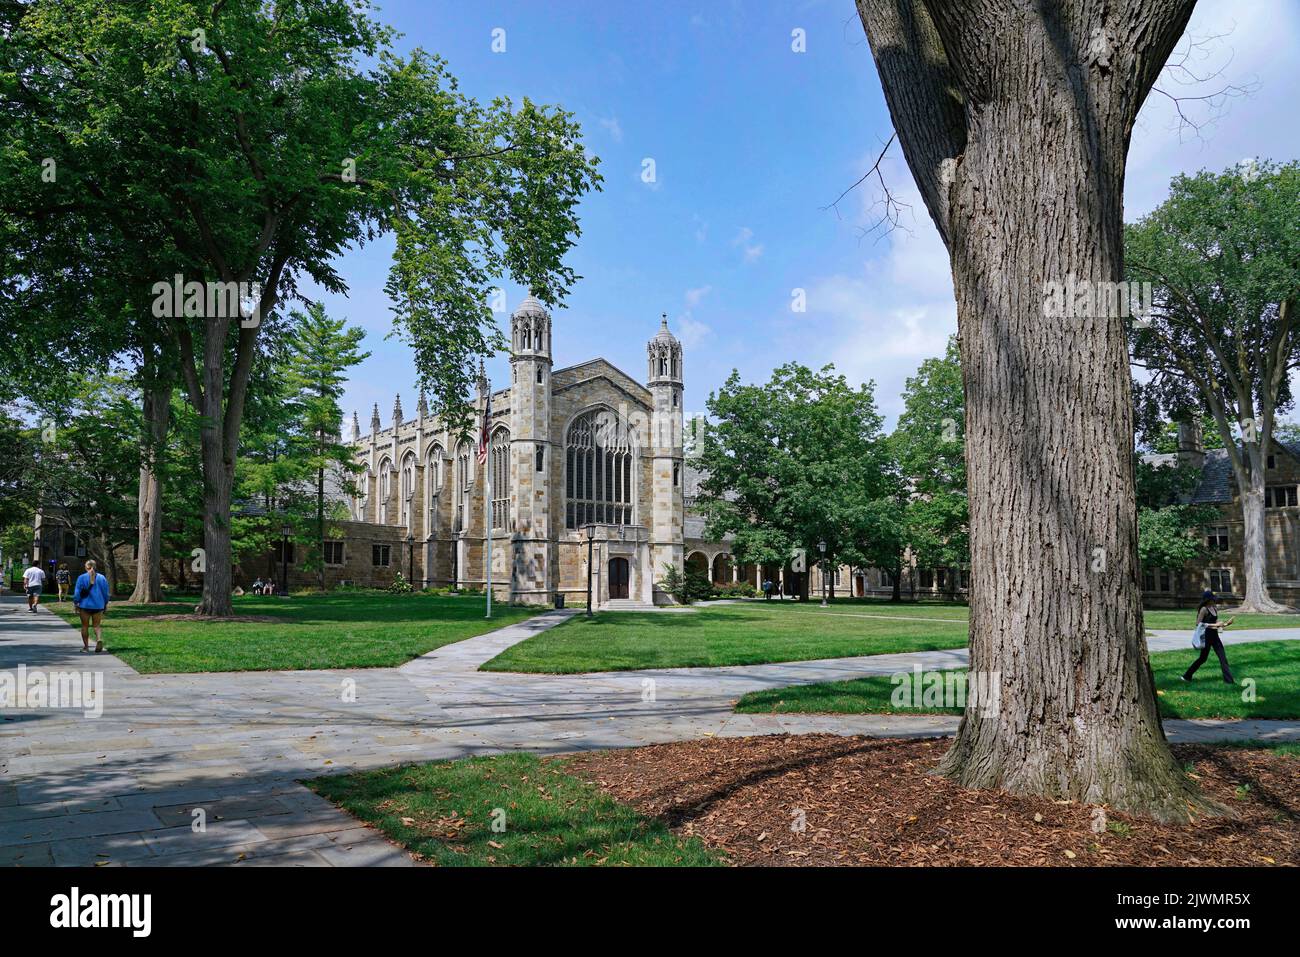 Ann Arbor, Michigan, USA - August 28, 2022:  University of Michigan campus with lawn and trees in front of gothic architecture buildings. Stock Photo